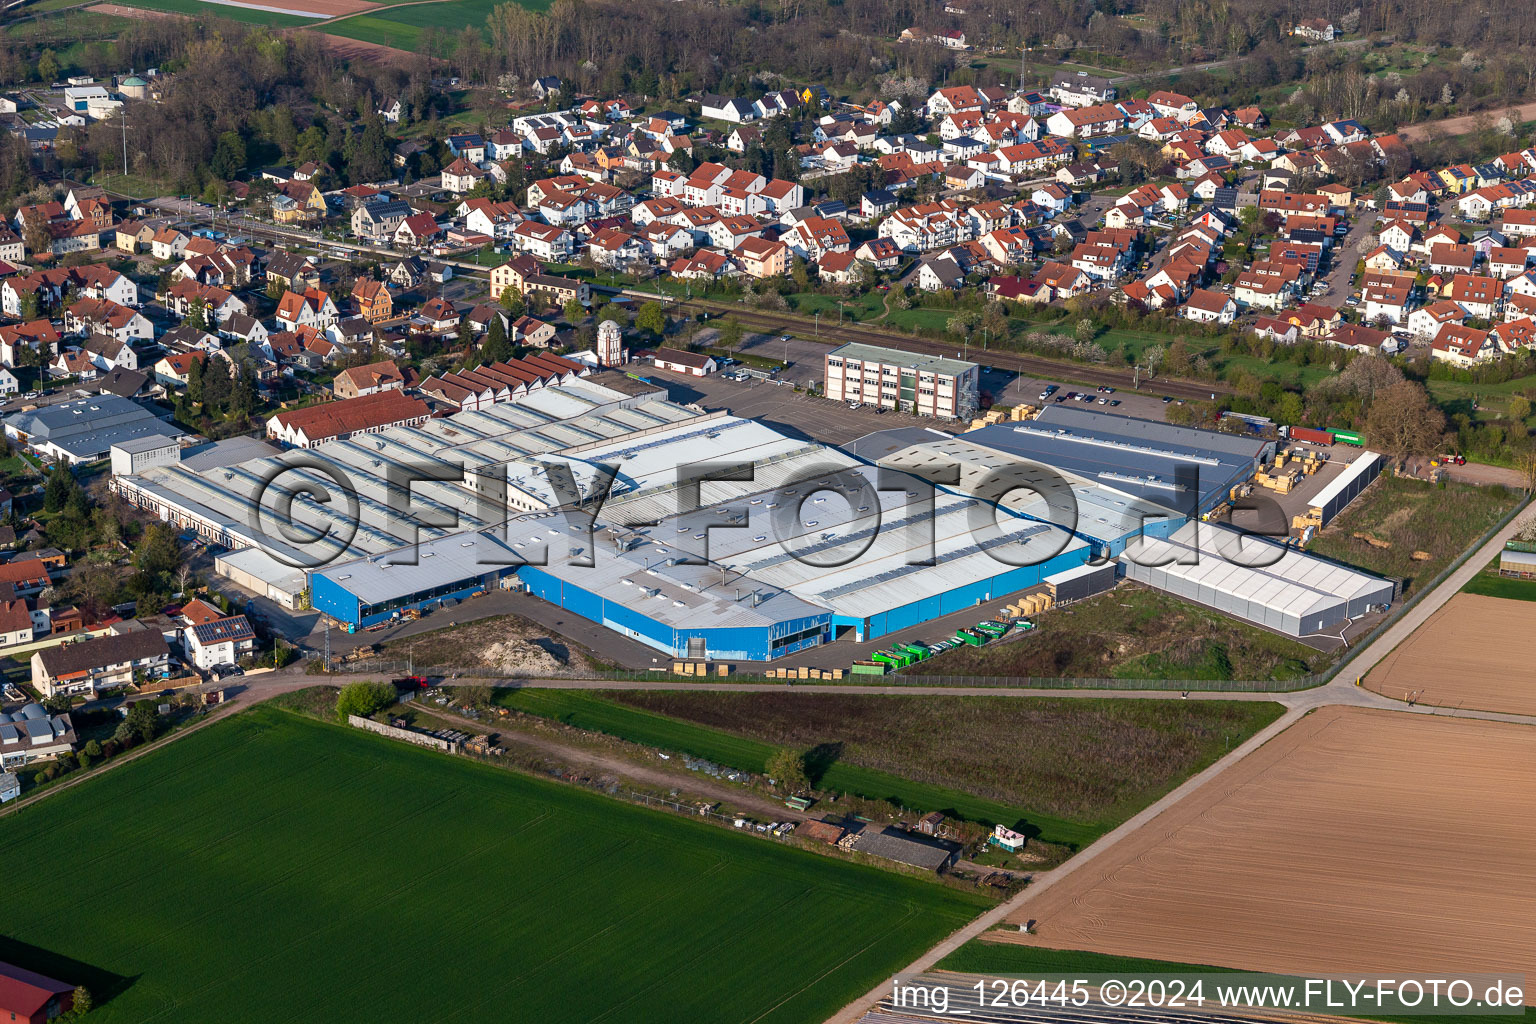 Company grounds and facilities of Kardex Remstar Maschinenbau in Bellheim in the state Rhineland-Palatinate, Germany